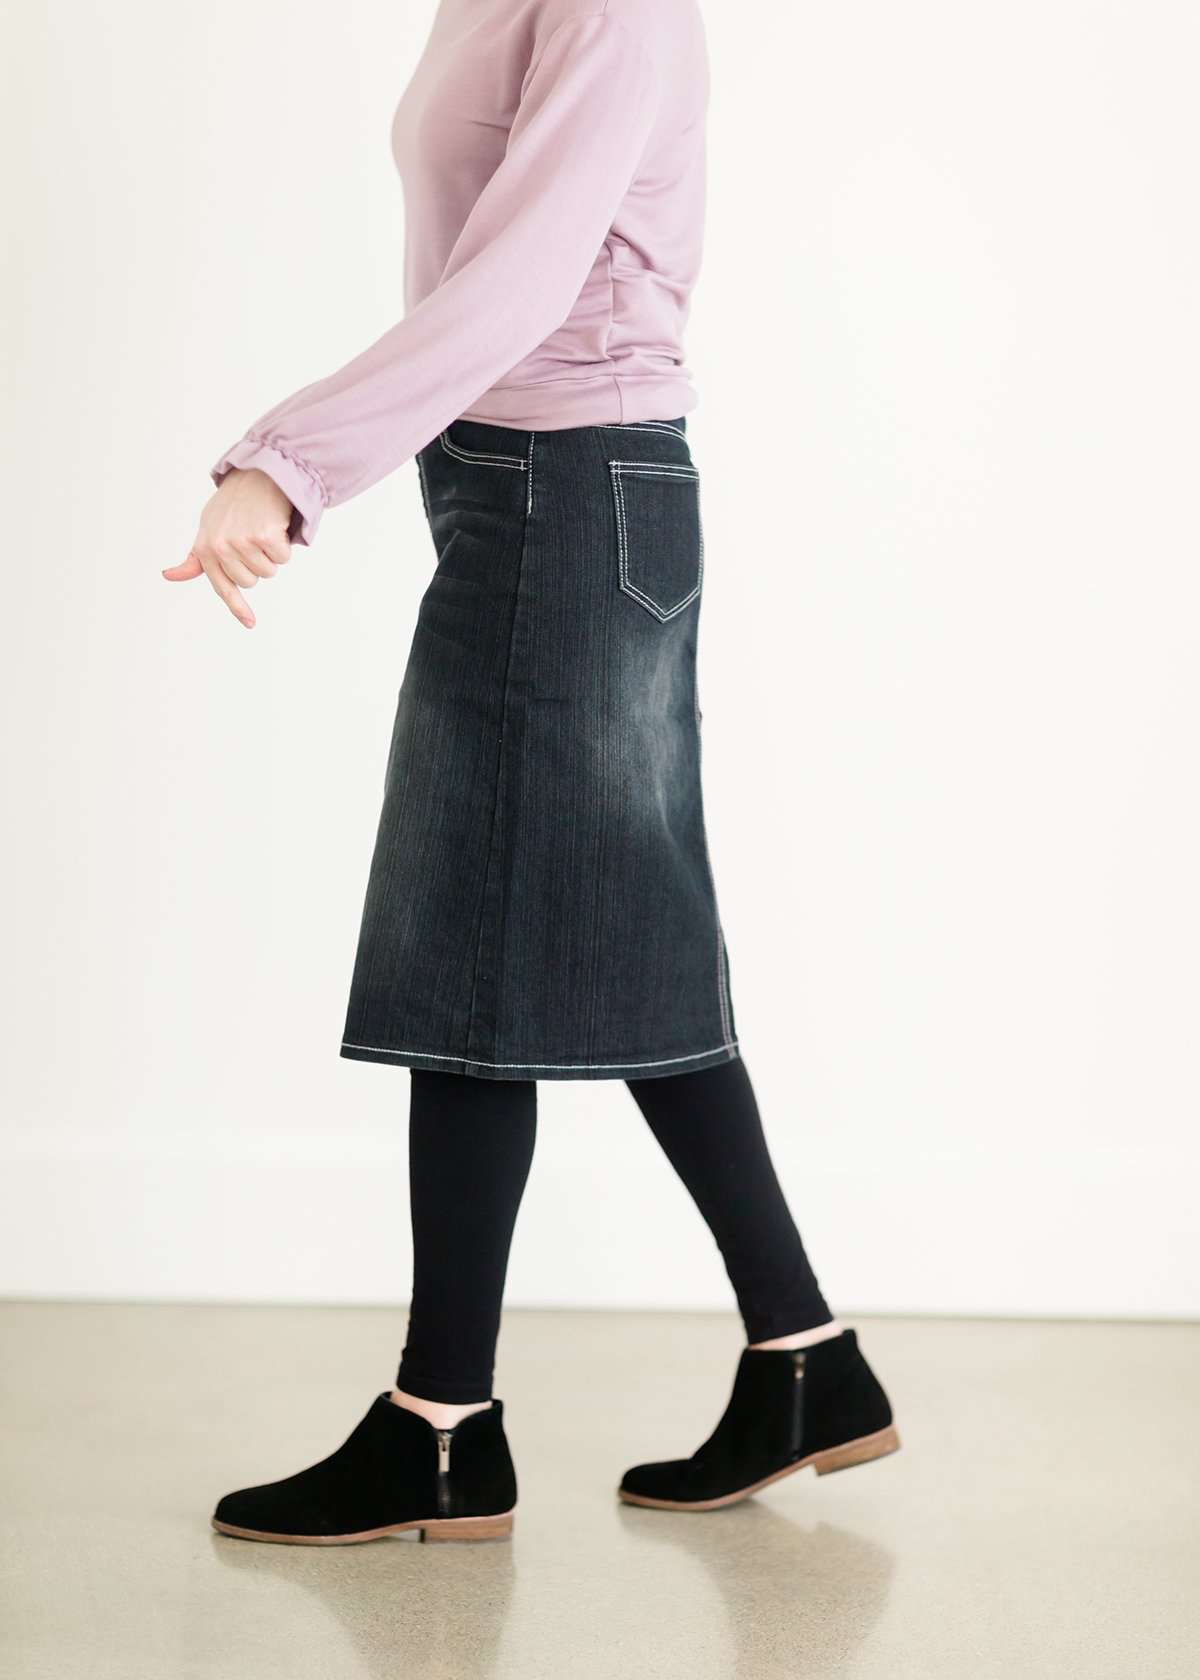 A black wash denim skirt with a ribbed knit elastic waist band. This skirt is paired with a purple sweatshirt, black leggings and black boots.